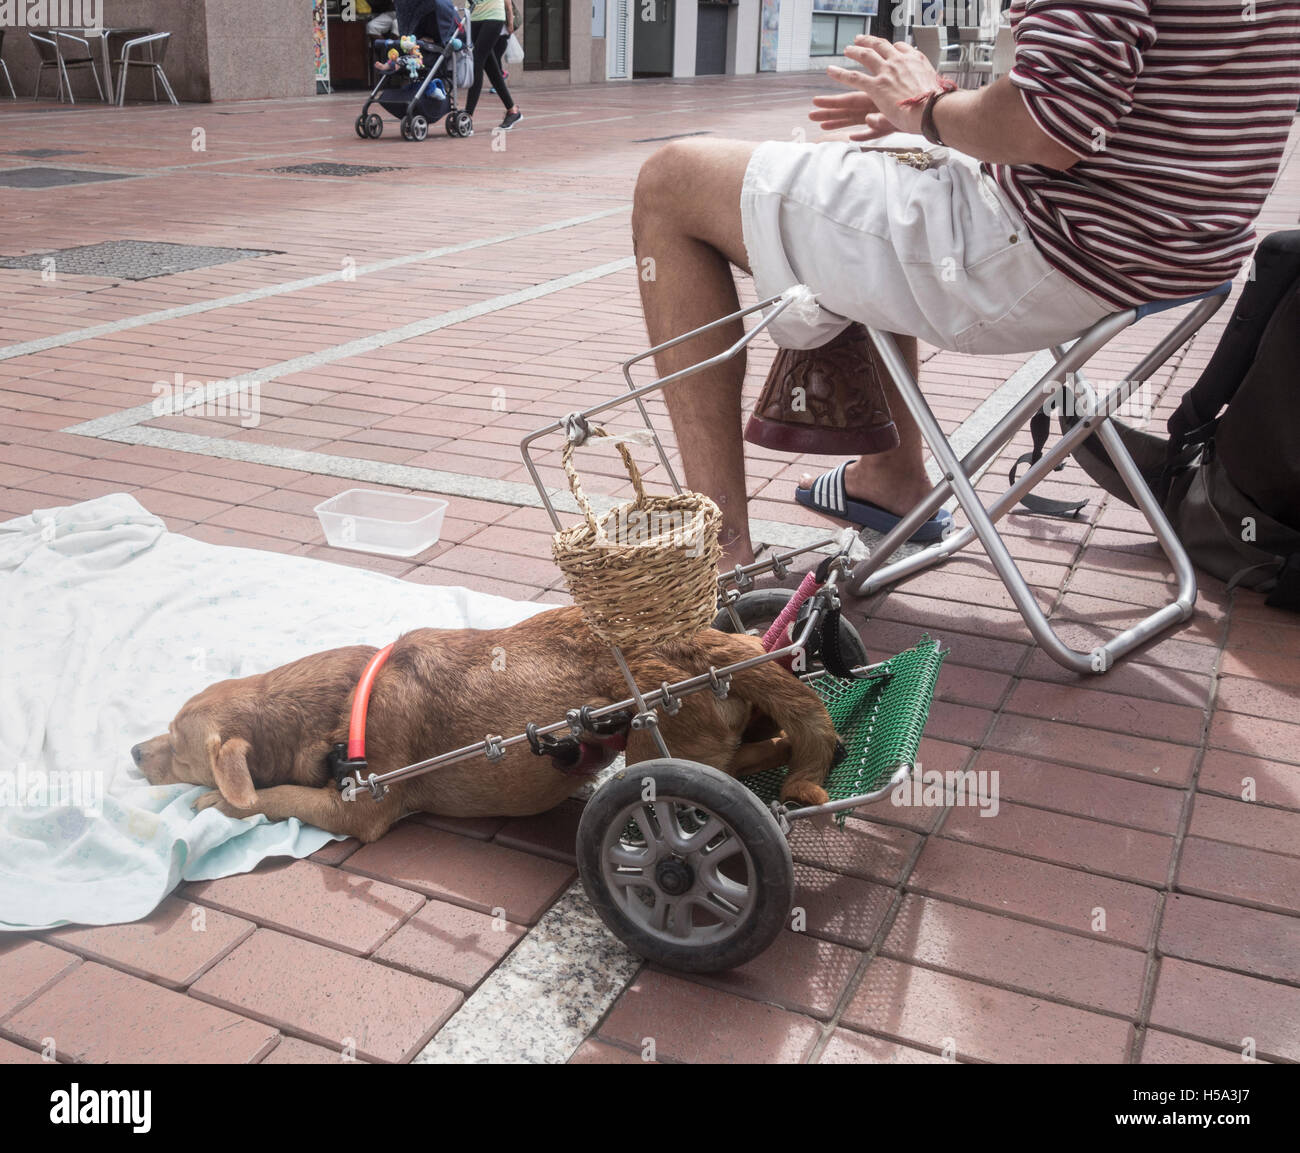 Busker in Spain with his disabled dog. Dog has basket to collect money hanging from frame supporting hind legs Stock Photo